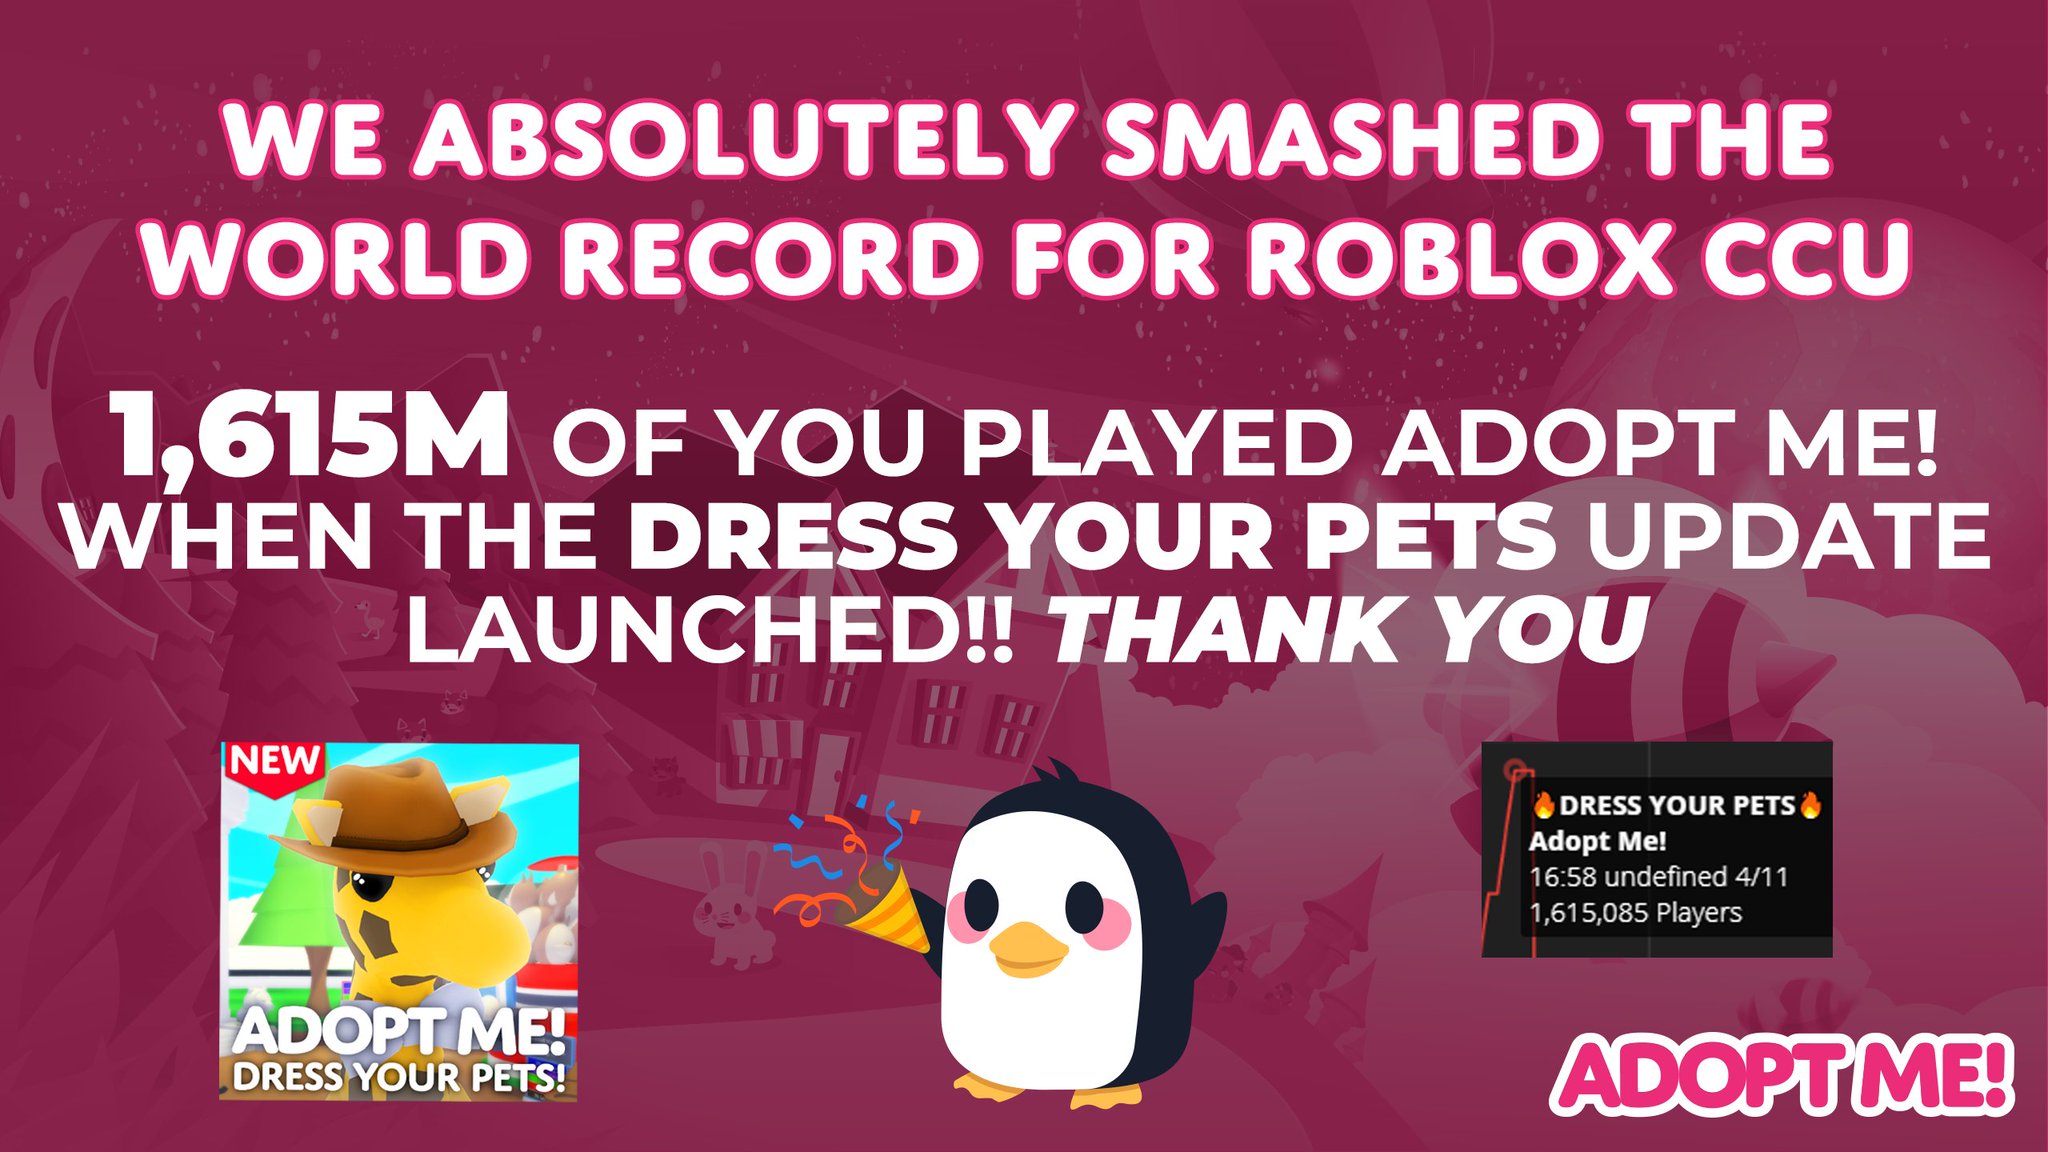 Adopt Me On Twitter The New World Record For Roblox Ccu - roblox adopt me dress up pets